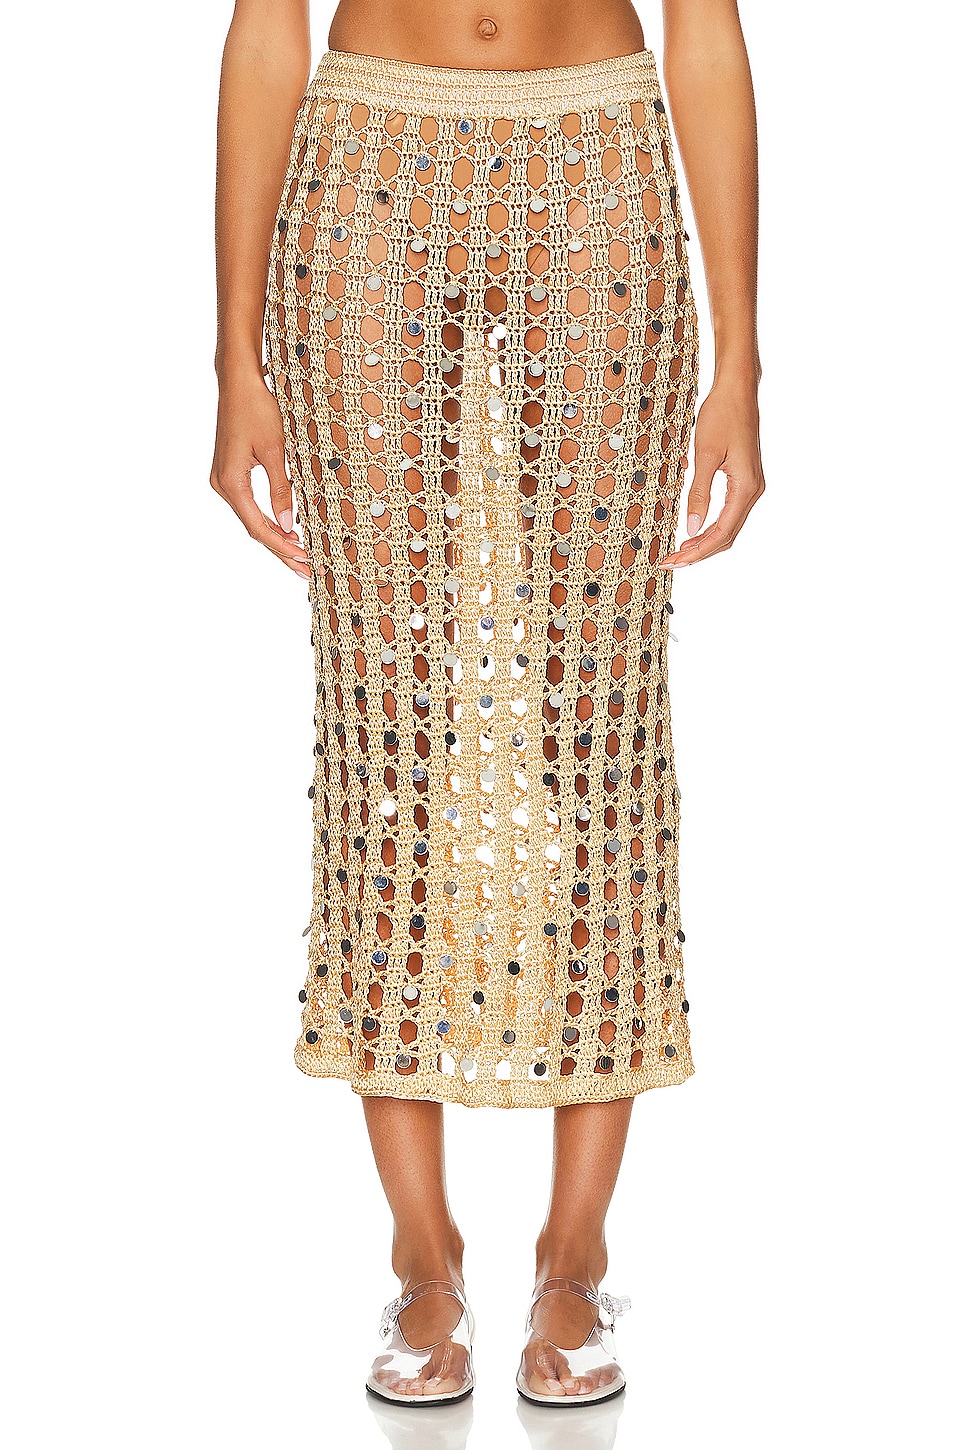 Image 1 of Calle Del Mar Crochet Embellished Skirt in Peach